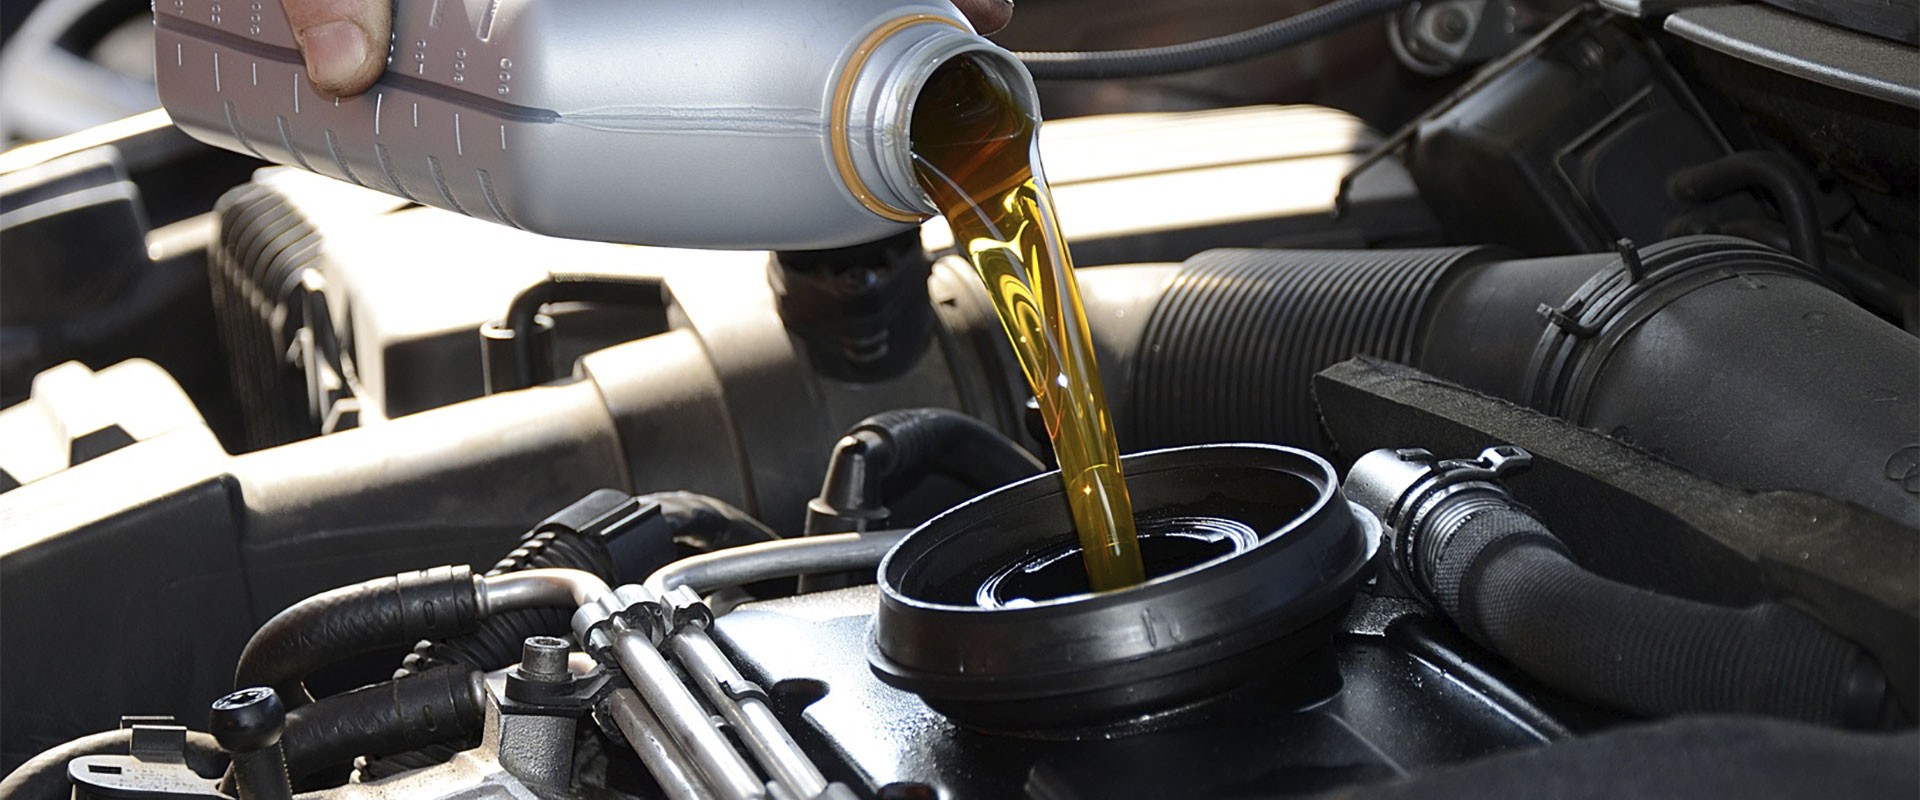 New gold-colored motor oil poured into a car engine